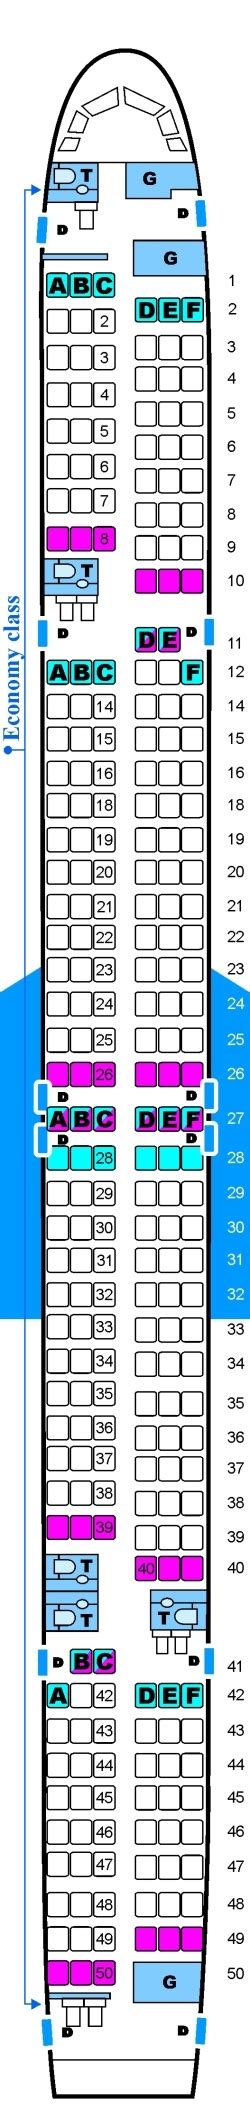 Boeing 757 American Airlines Seating Chart